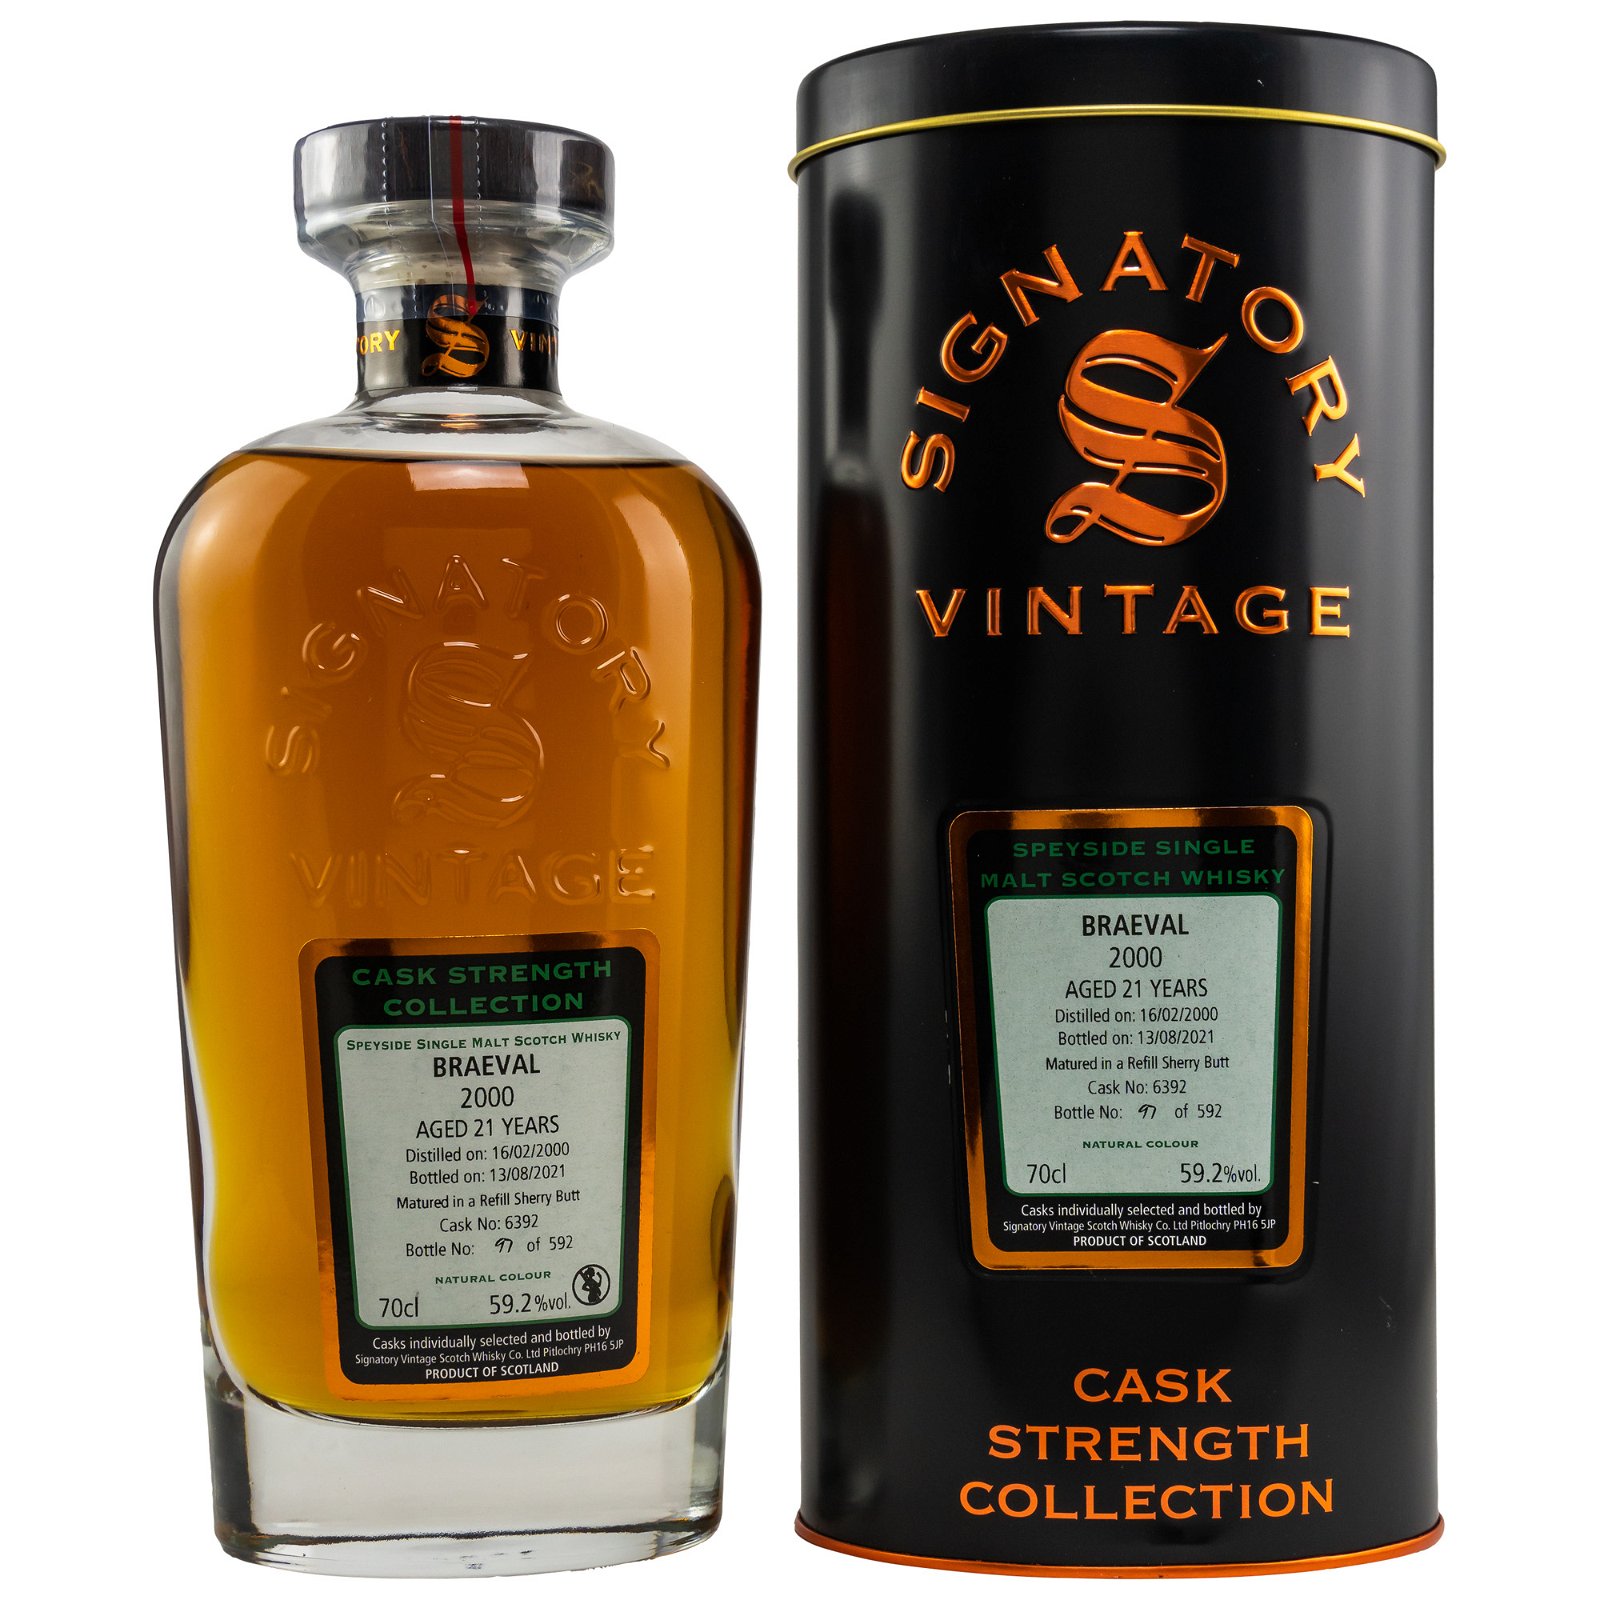 Braeval 2000/2021 - 21 Jahre Single Refill Sherry Butt No. 6392 Cask Strength Collection (Signatory)